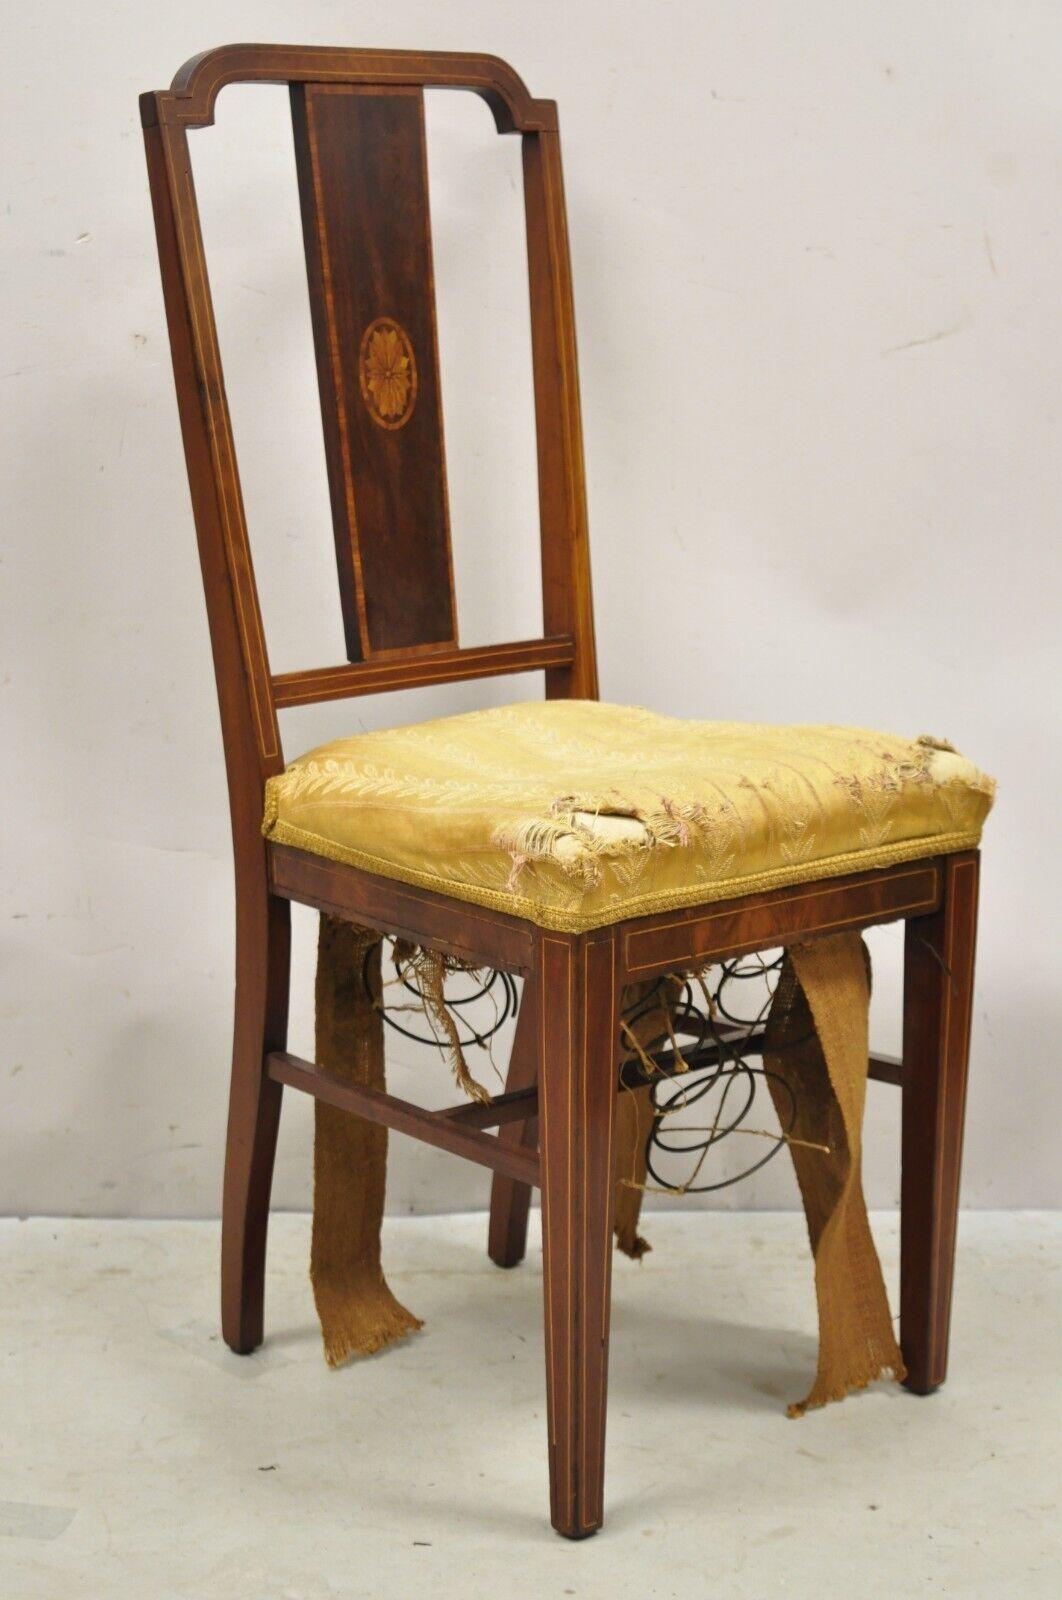 Antique Edwardian Mahogany Side Chair with Pencil and Pinwheel Inlay. Item features a solid wood frame, beautiful wood grain, nice inlay, very nice antique item, great style and form. Circa Early 1900s. Measurements: 37